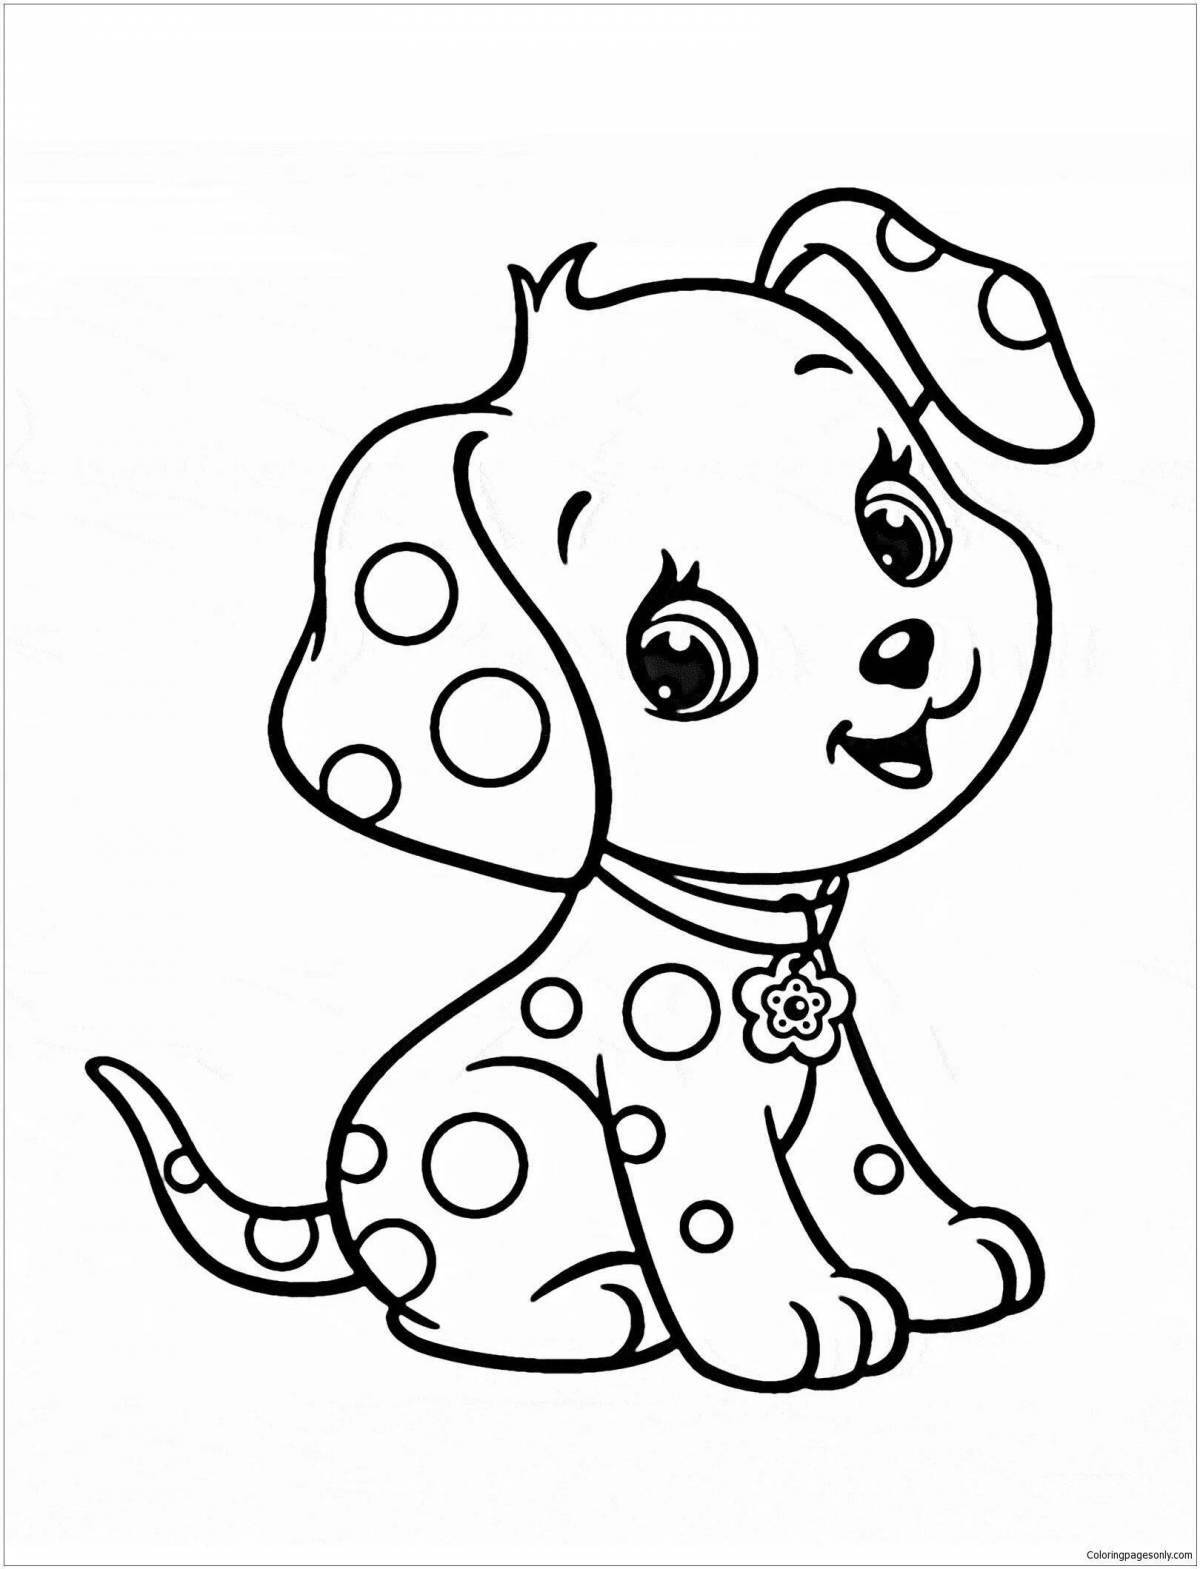 Naughty puppy coloring book for kids